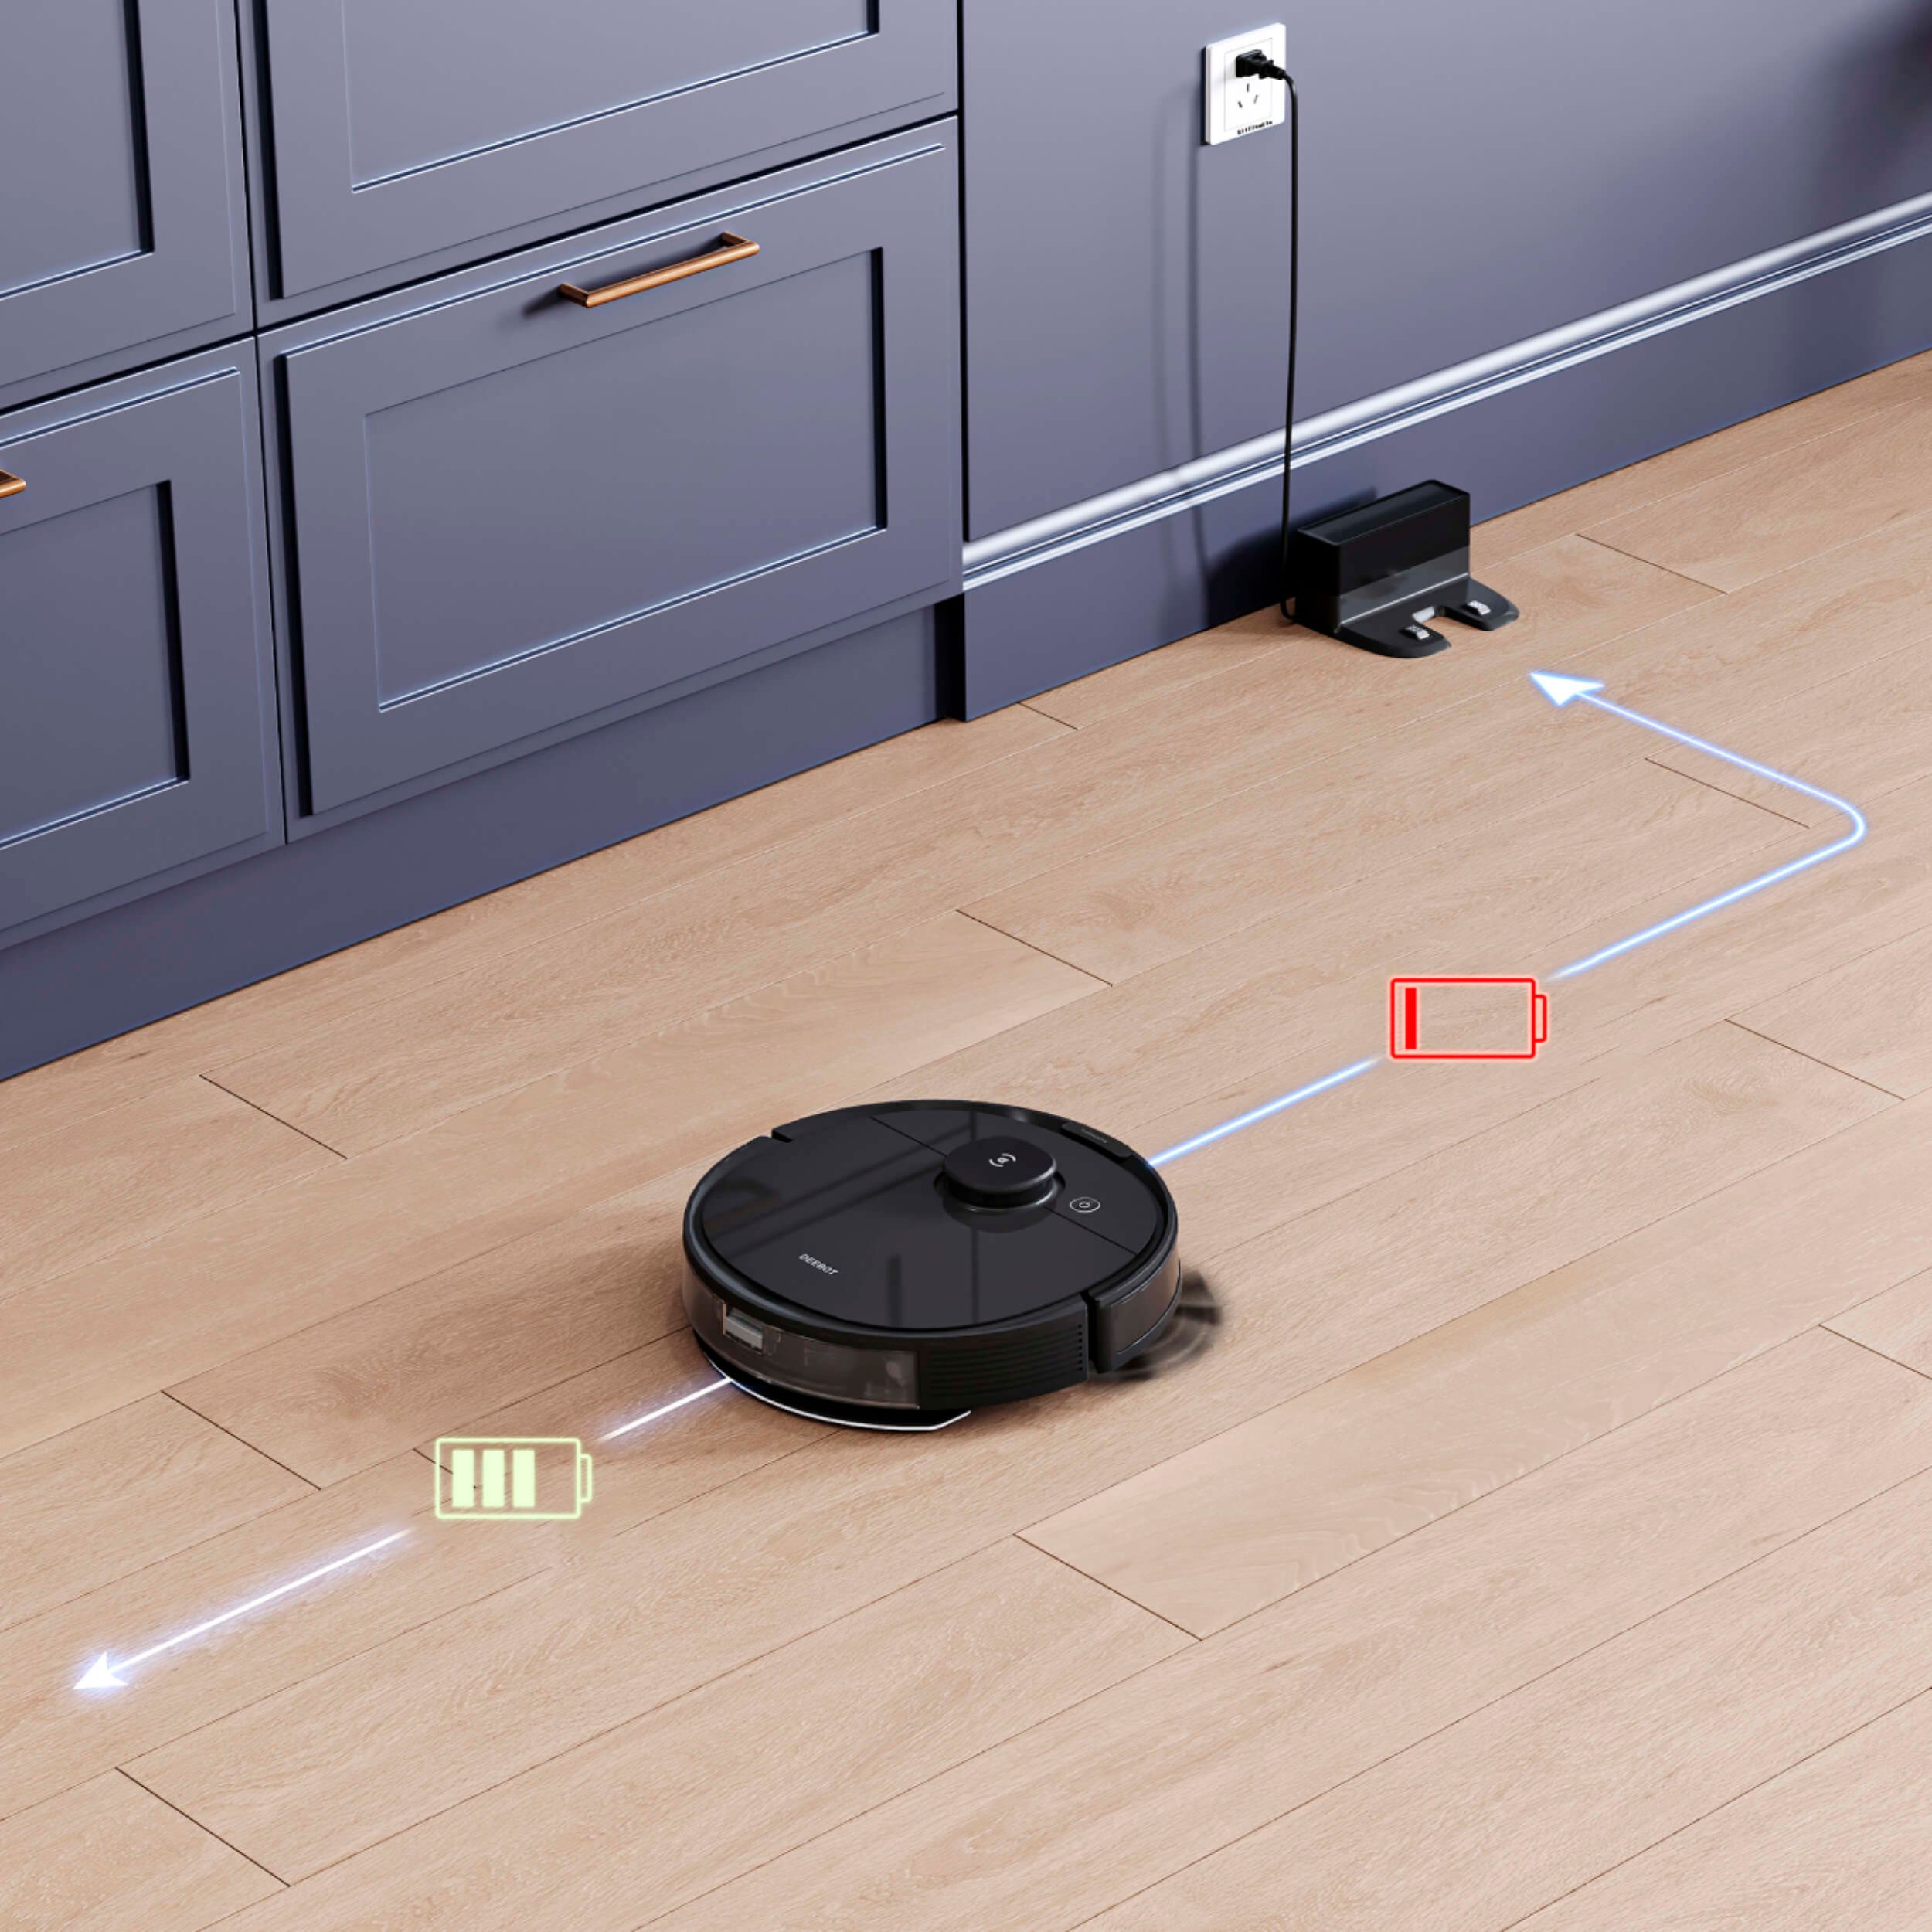 Angle View: ECOVACS Robotics - DEEBOT N8 Vacuum & Mop Robot with Advanced Laser Mapping - Black